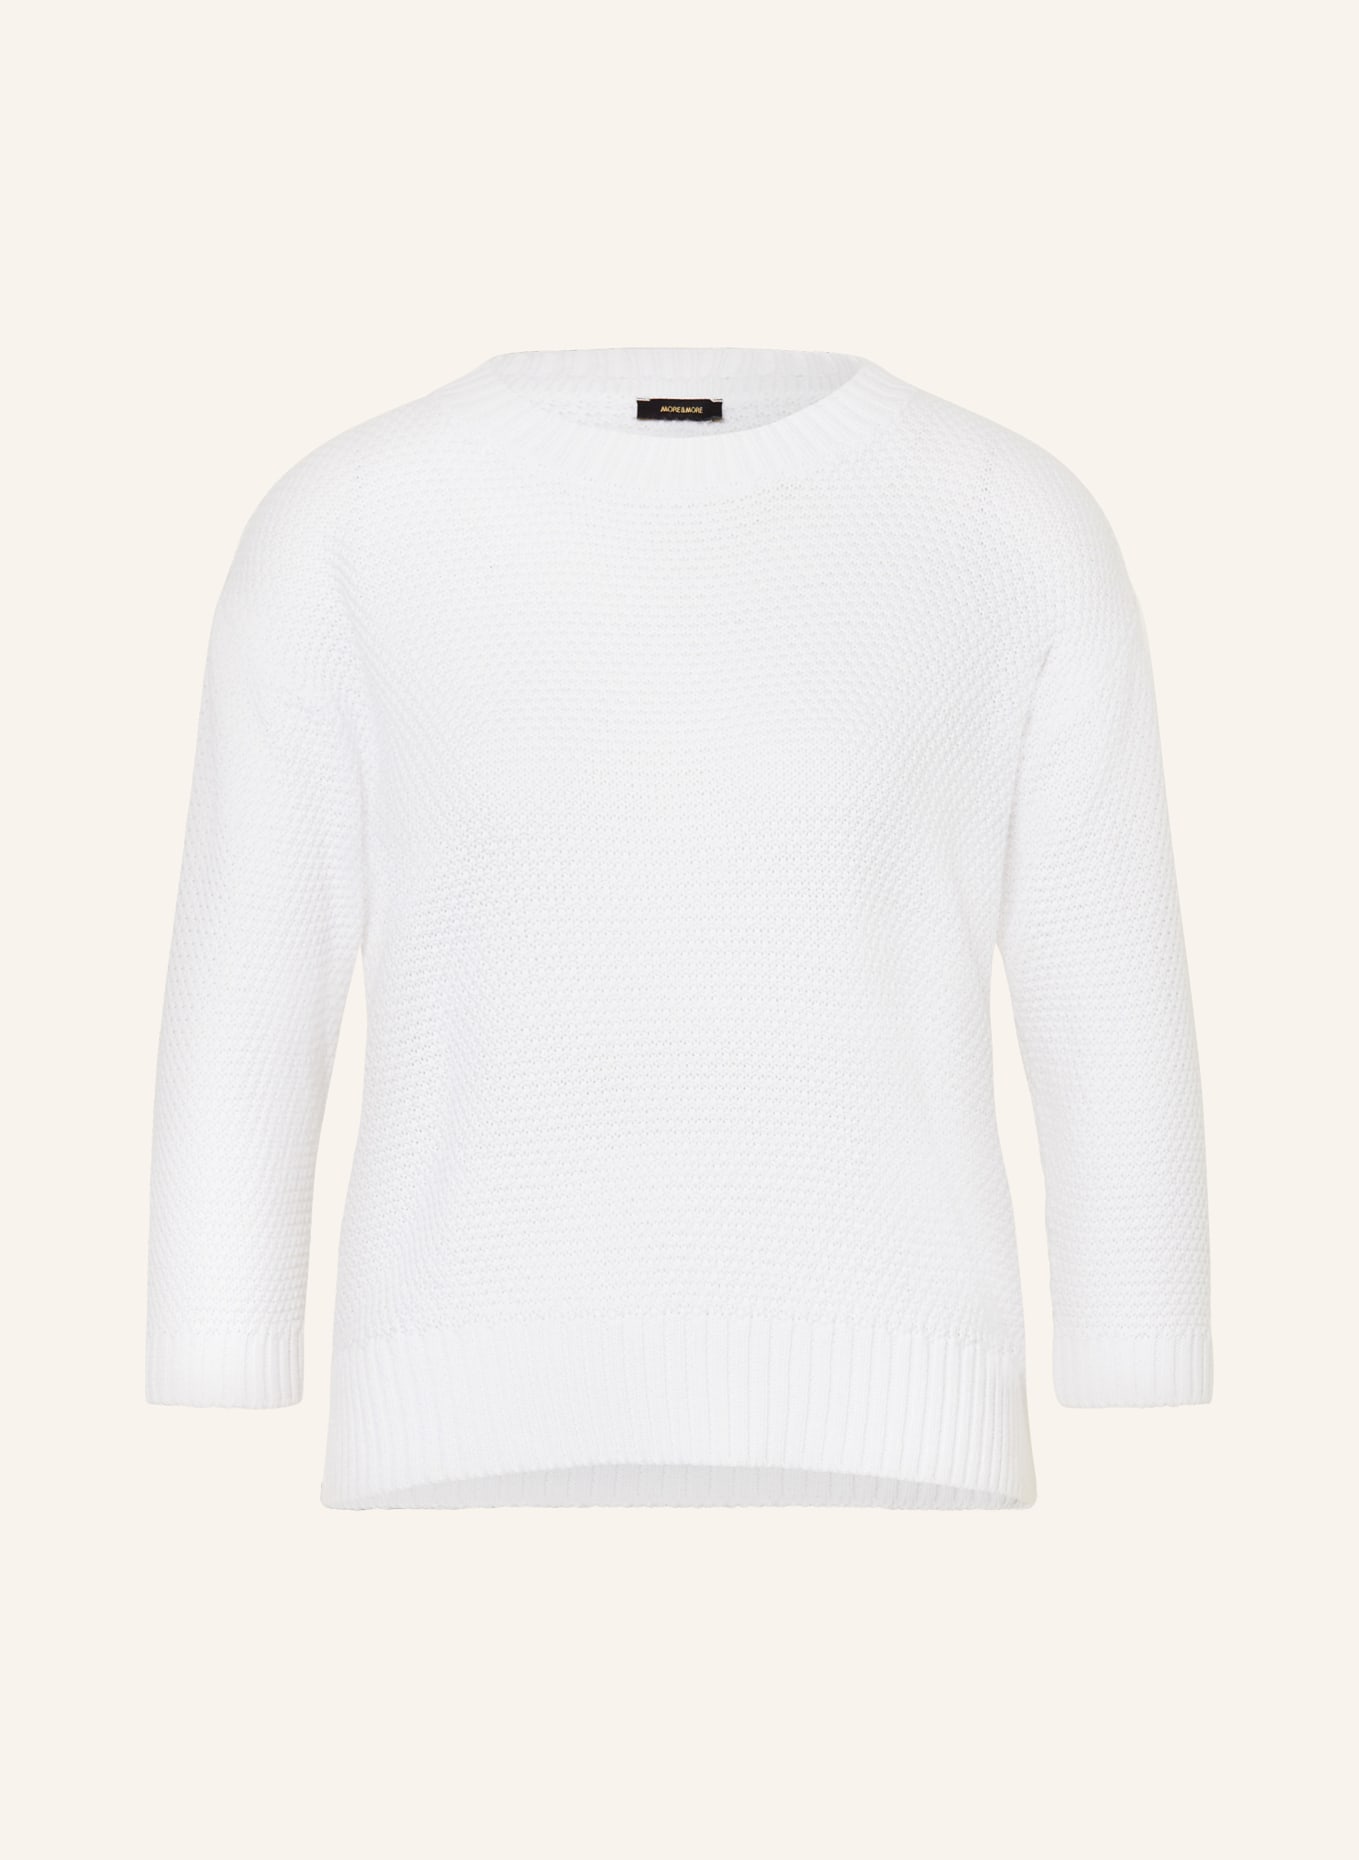 MORE & MORE Sweater with 3/4 sleeves, Color: WHITE (Image 1)